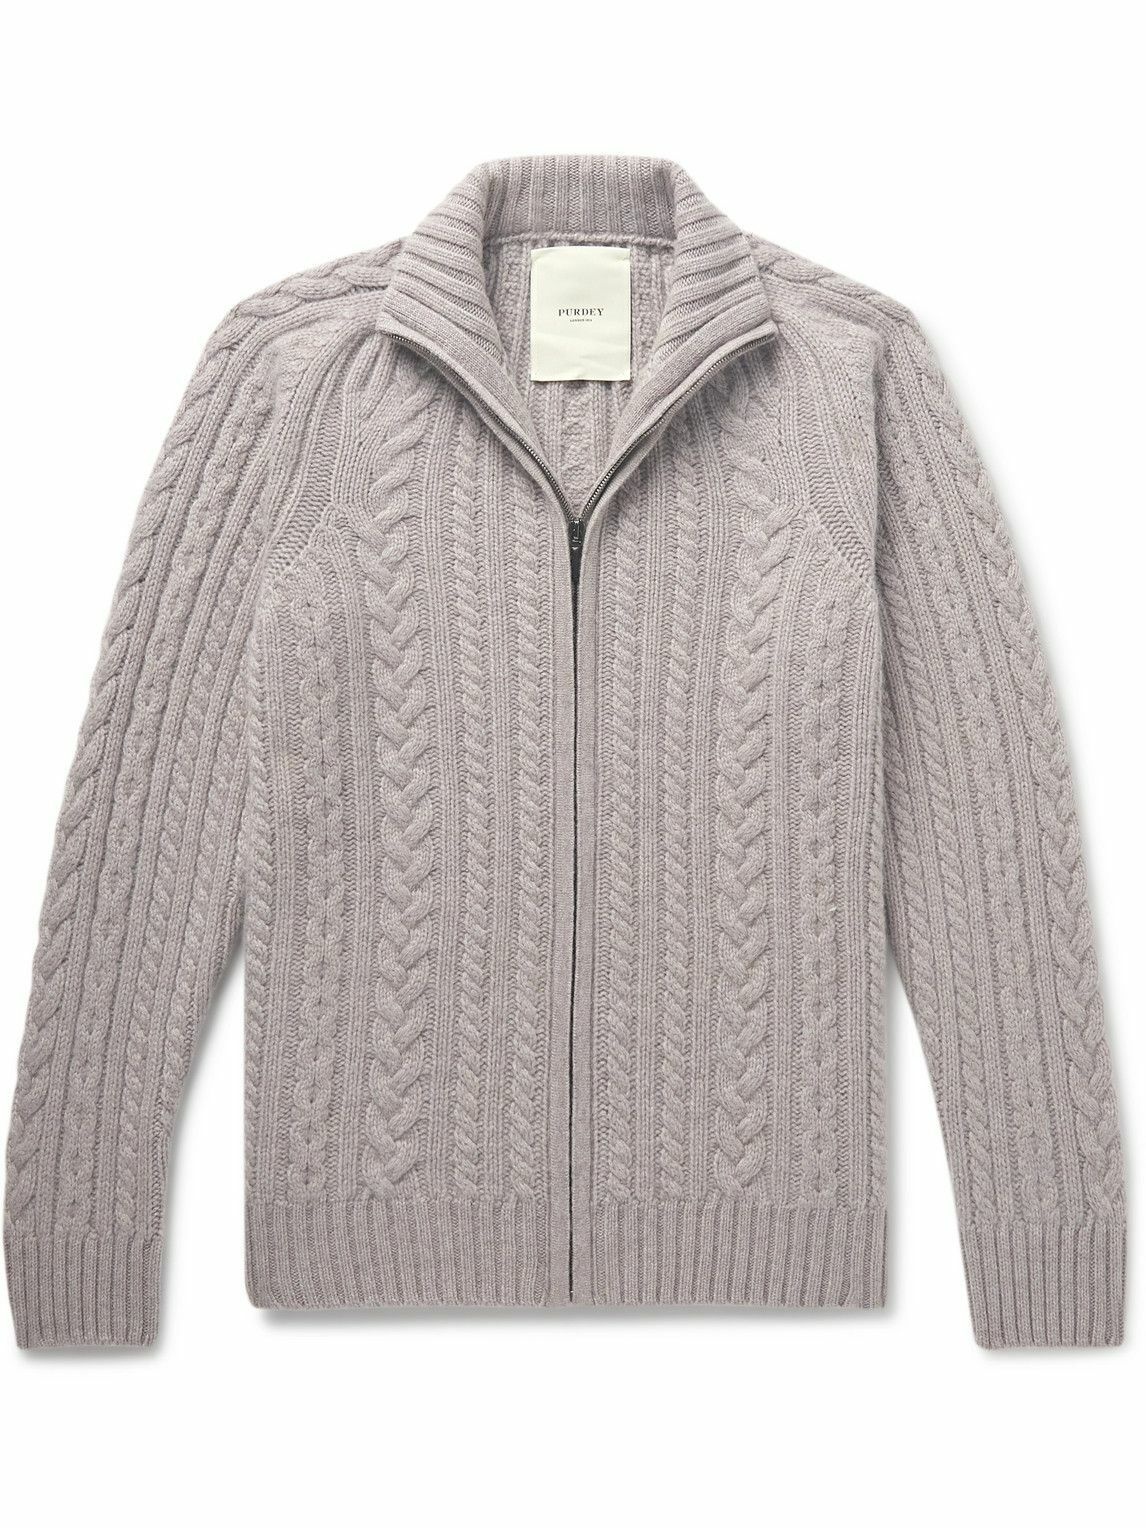 Purdey - Cable-Knit Cashmere Zip-Up Cardigan - Gray Purdey